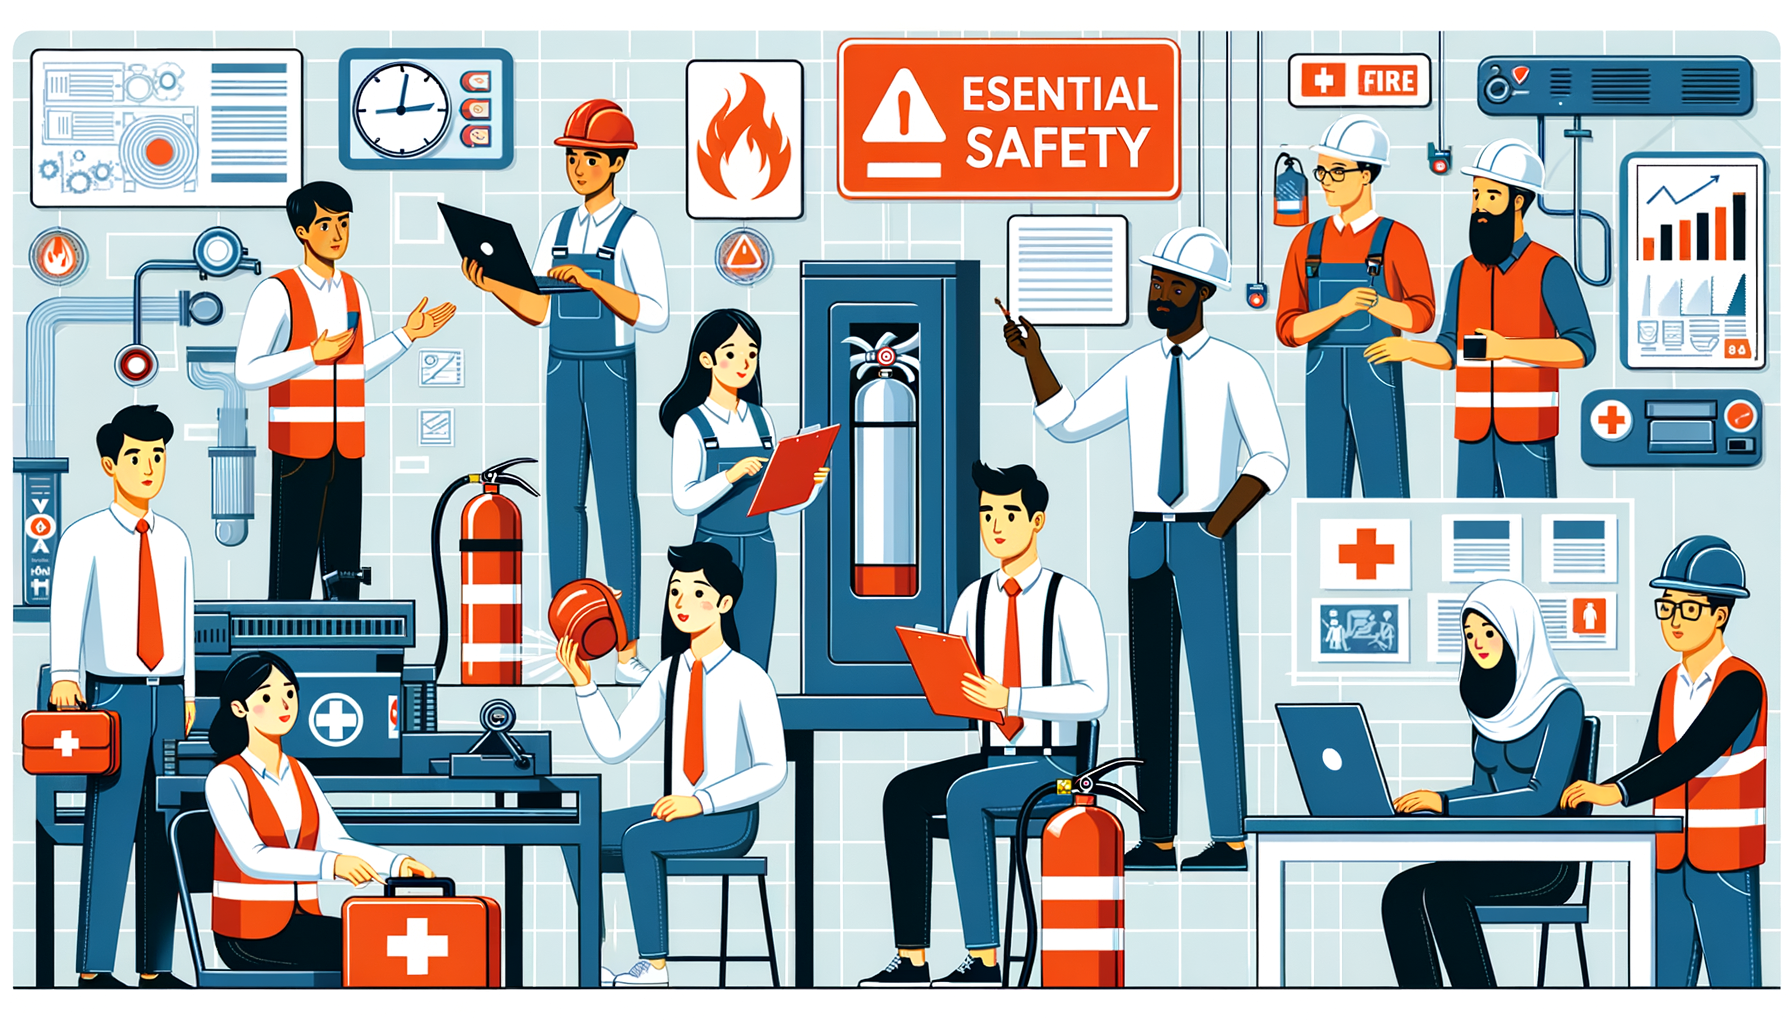 Essential Workplace Safety Training for Every Employee